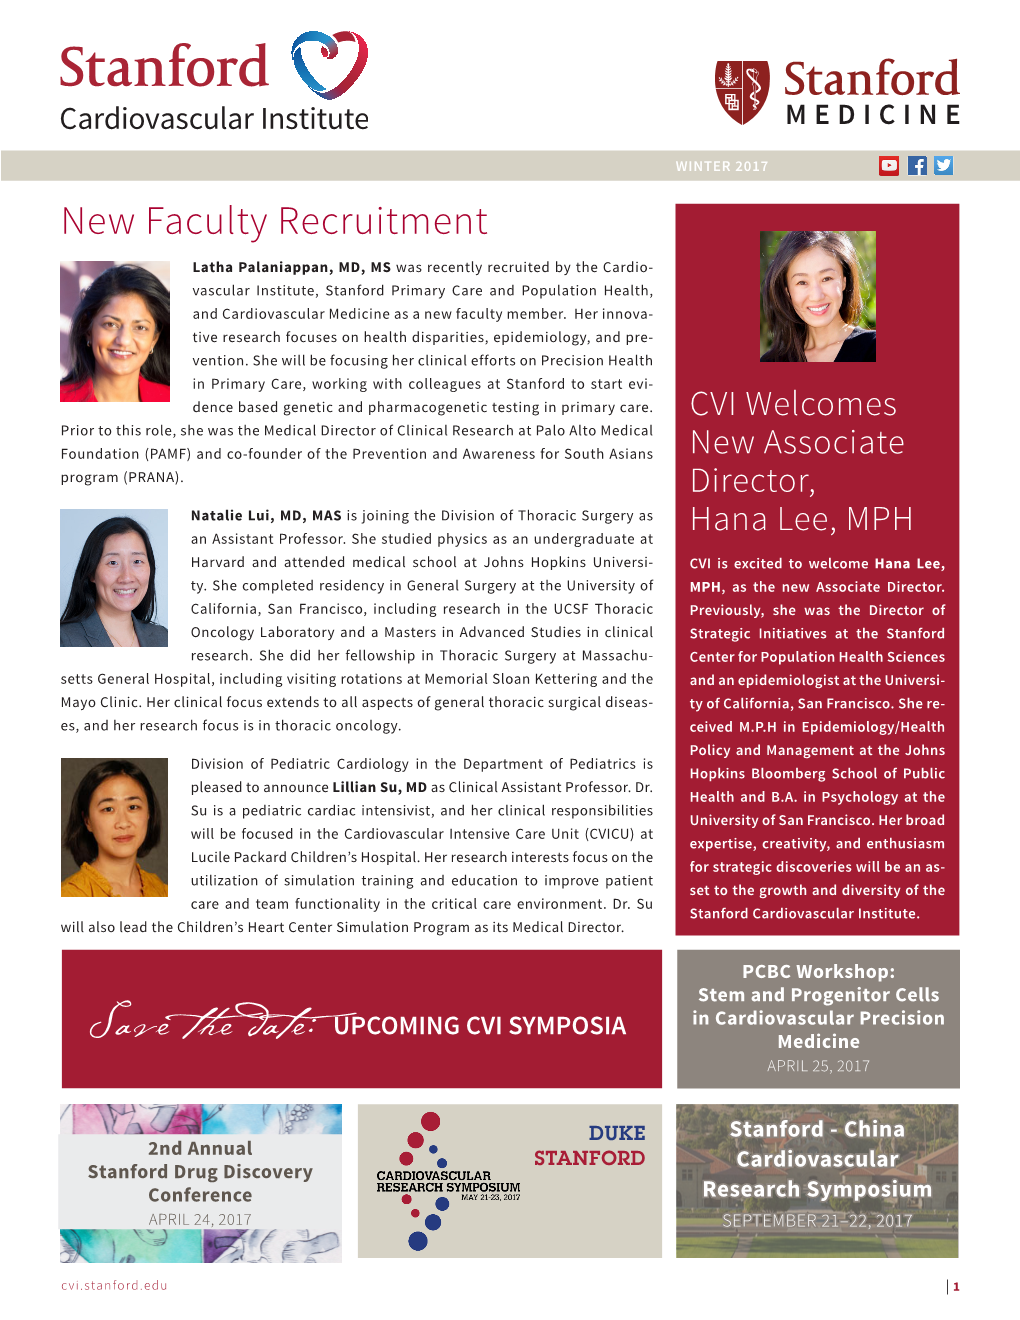 New Faculty Recruitment